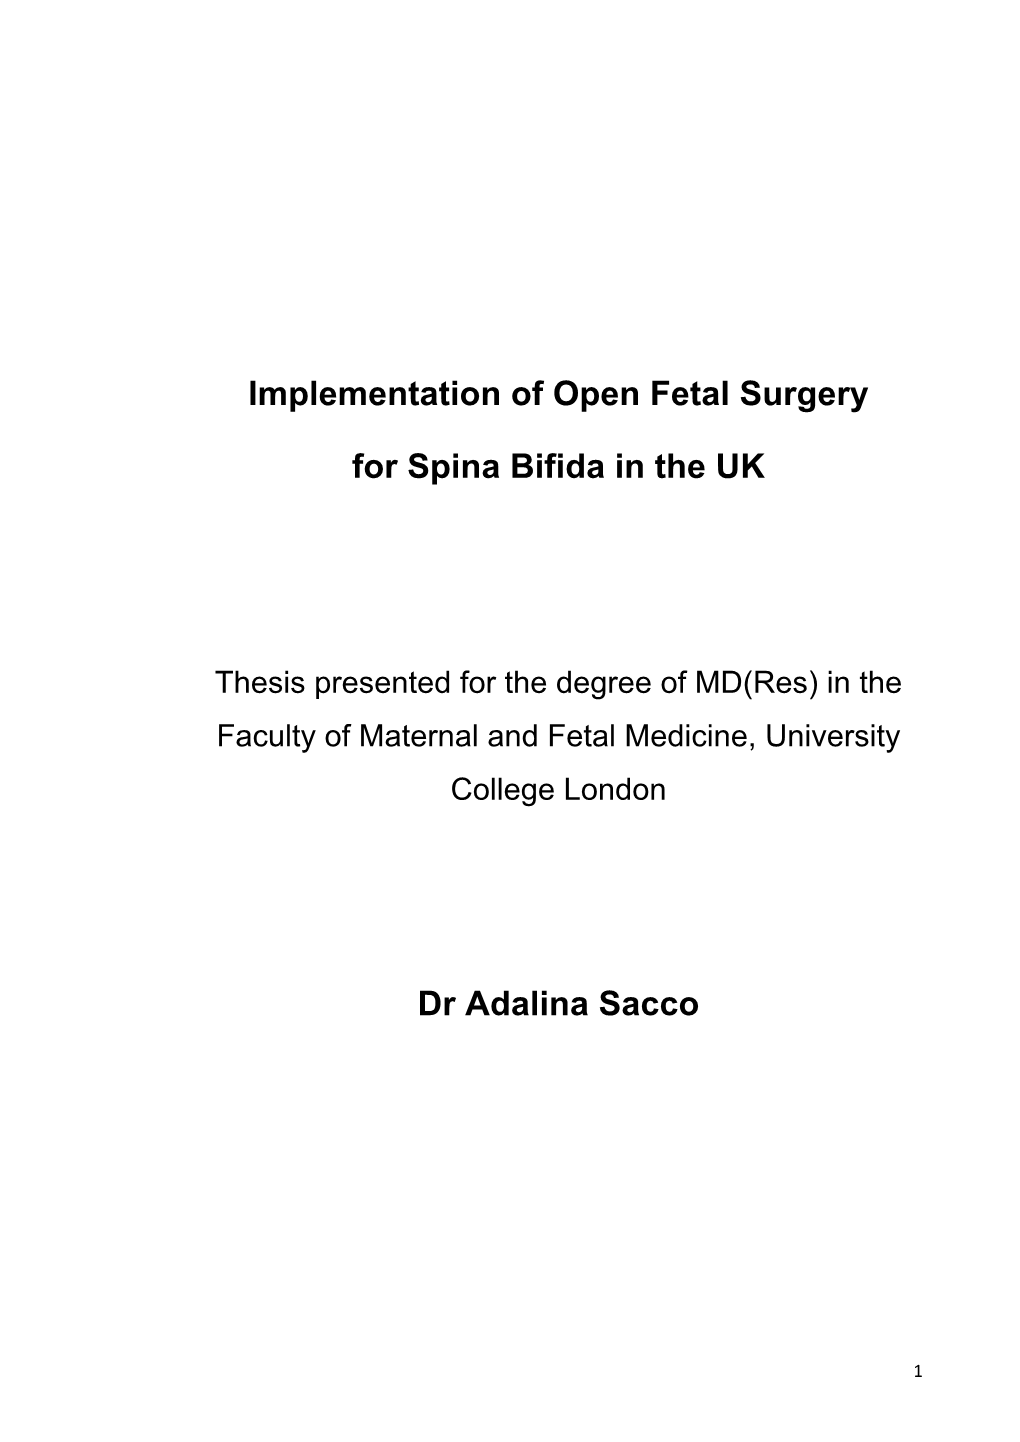 Implementation of Open Fetal Surgery for Spina Bifida in the UK Dr